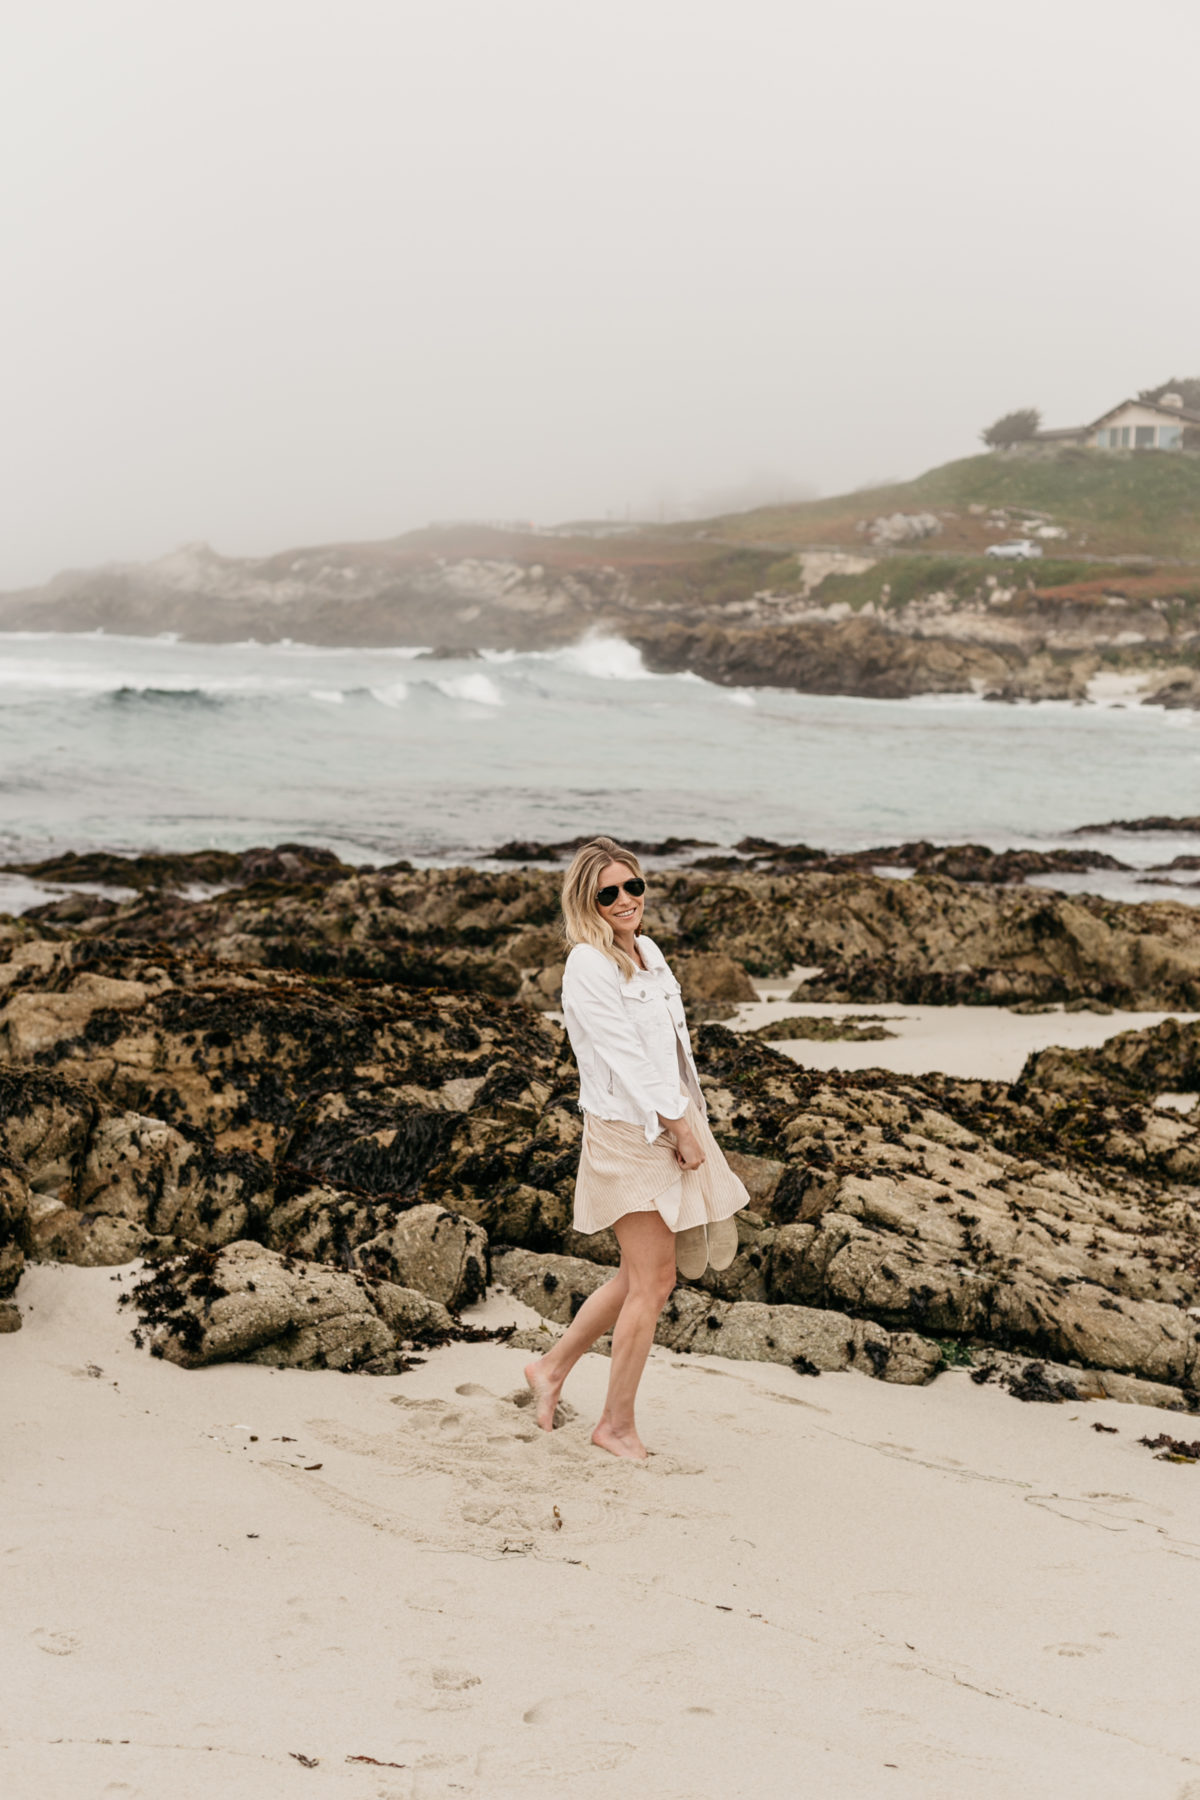 Carmel By The Sea - What To Do | One Small Blonde